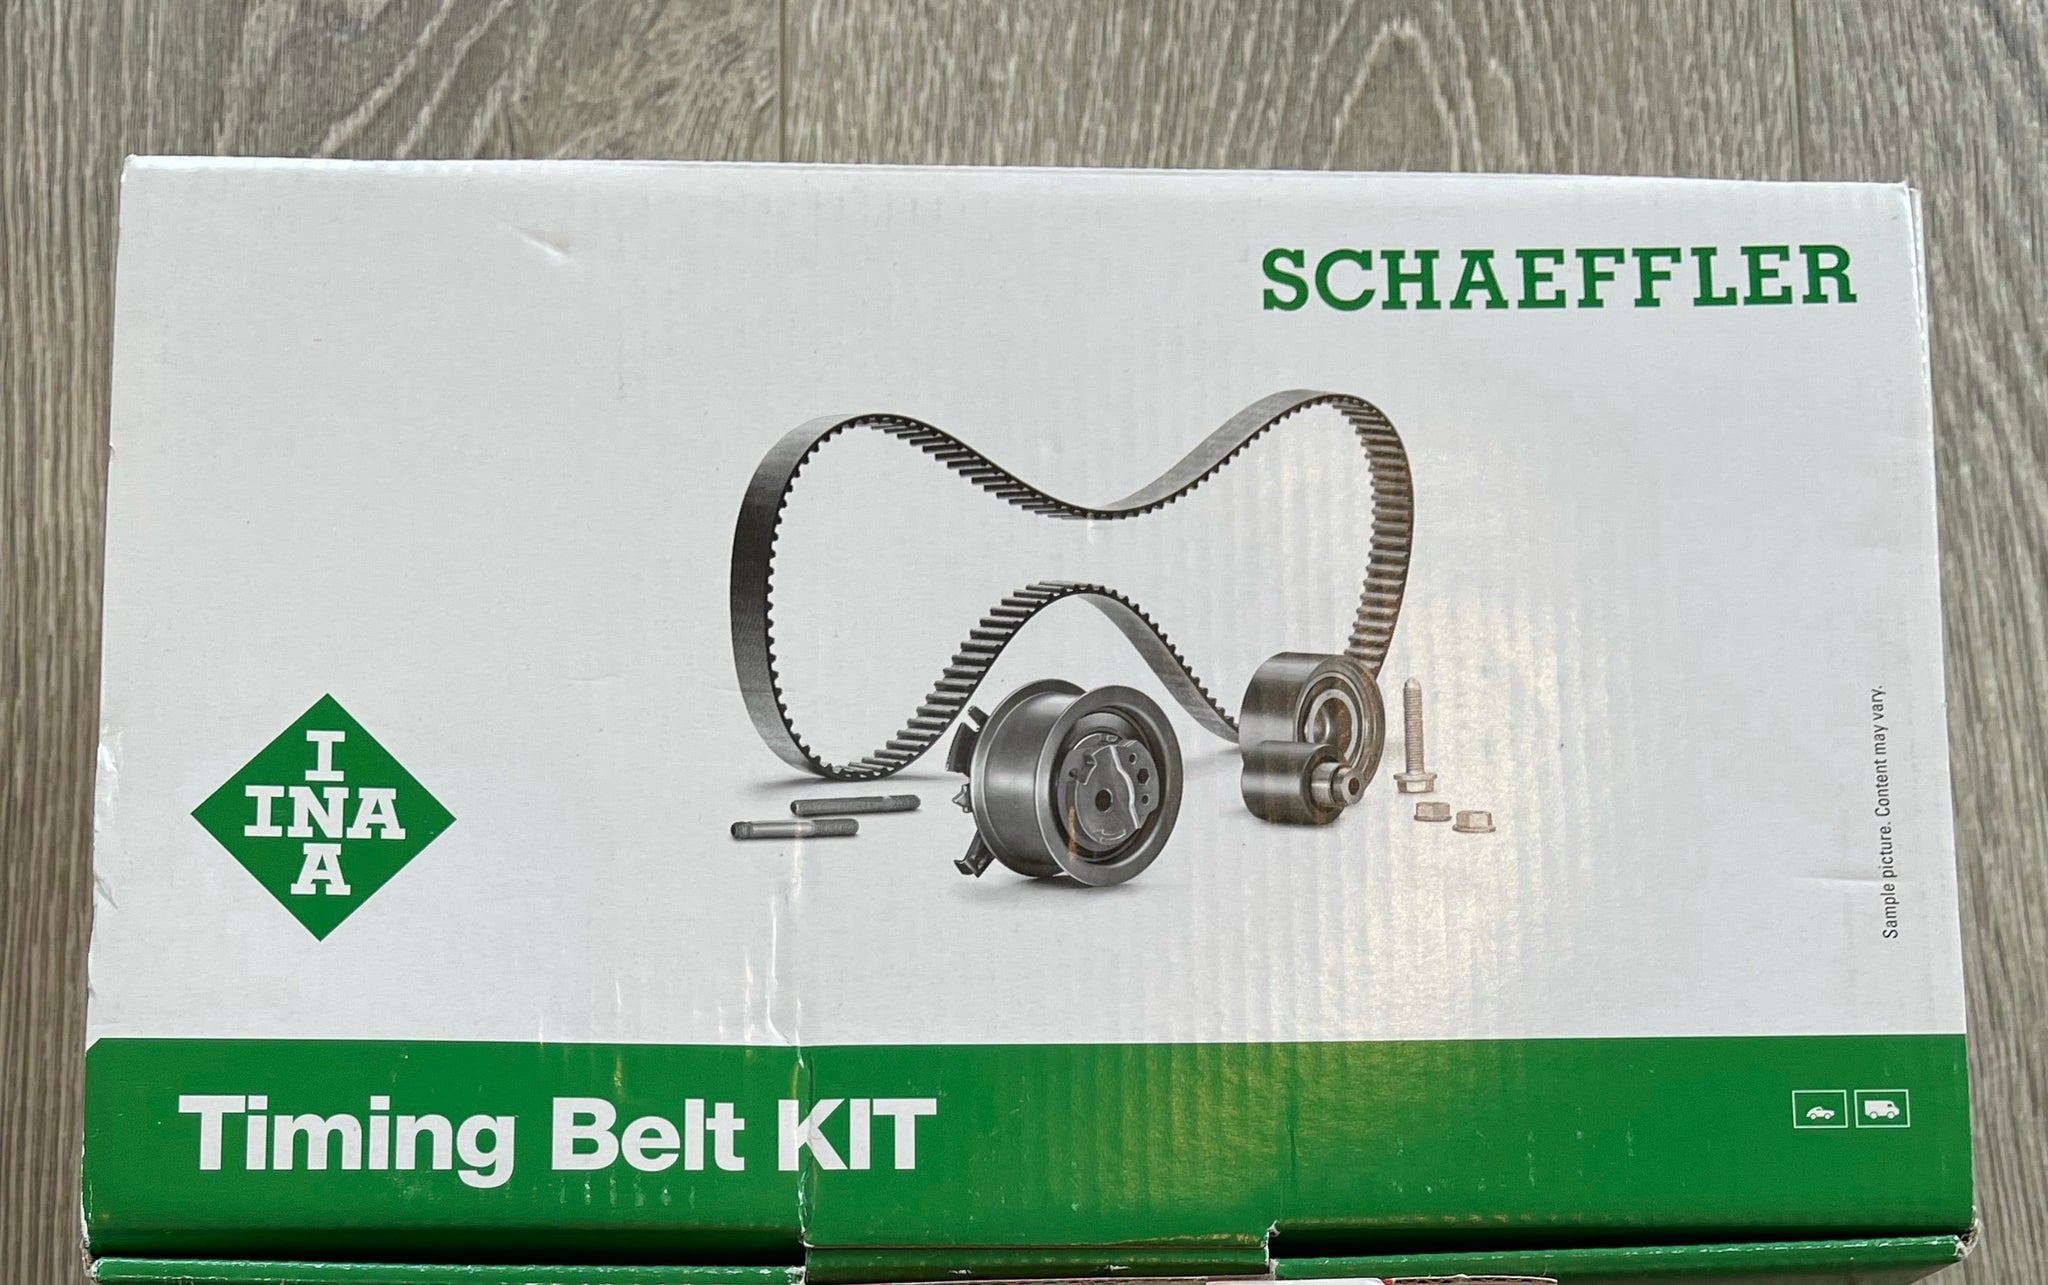 5300445 10 5380049 10 **SPECIAL** INA Timing Belt Kit And Water Pump Suitable For Golf 5 GTI, Golf 6R, Audi A3 2.0T FSI / TFSI S3 TTS RS EA113 Cambelt 530044510 538004910 5300445100 5380049100